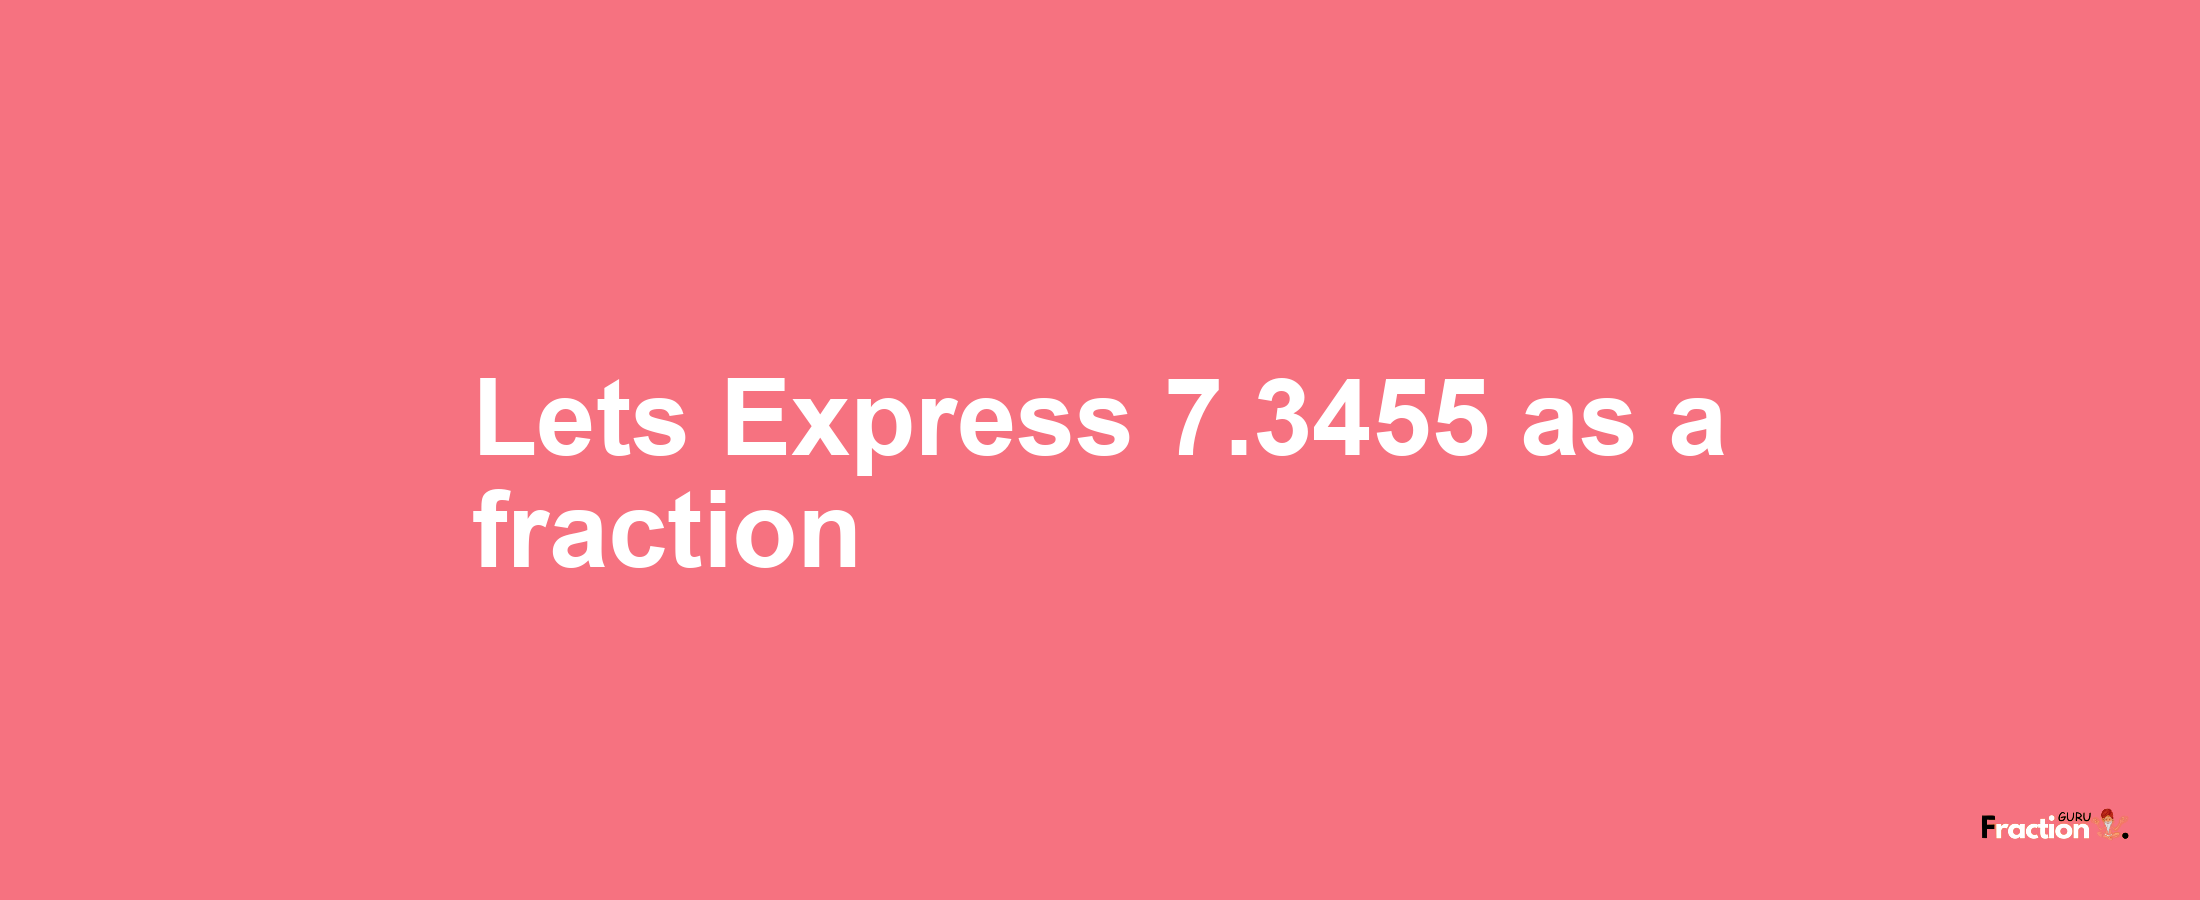 Lets Express 7.3455 as afraction